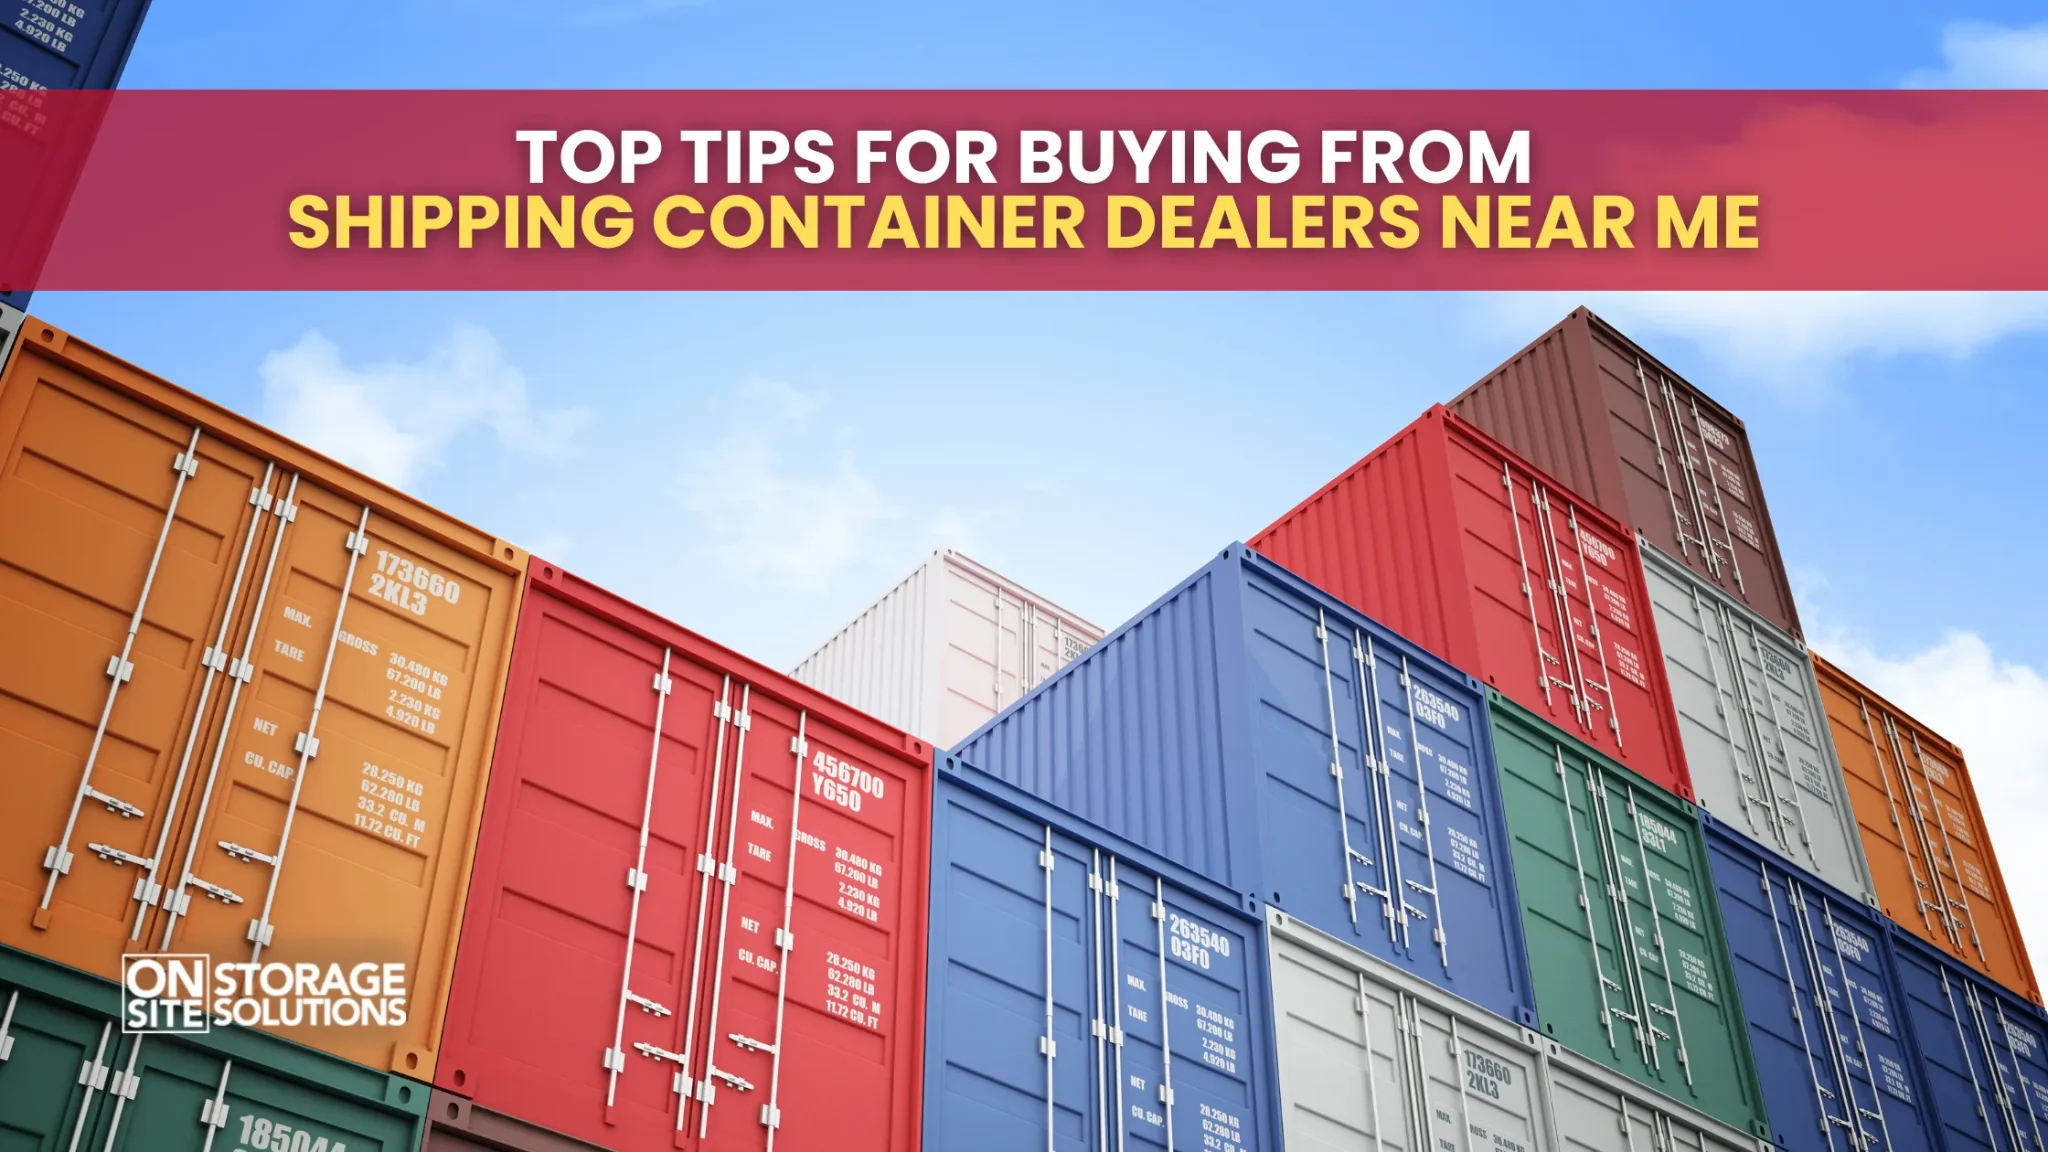 Top Tips for Buying from Shipping Container Dealers Near Me